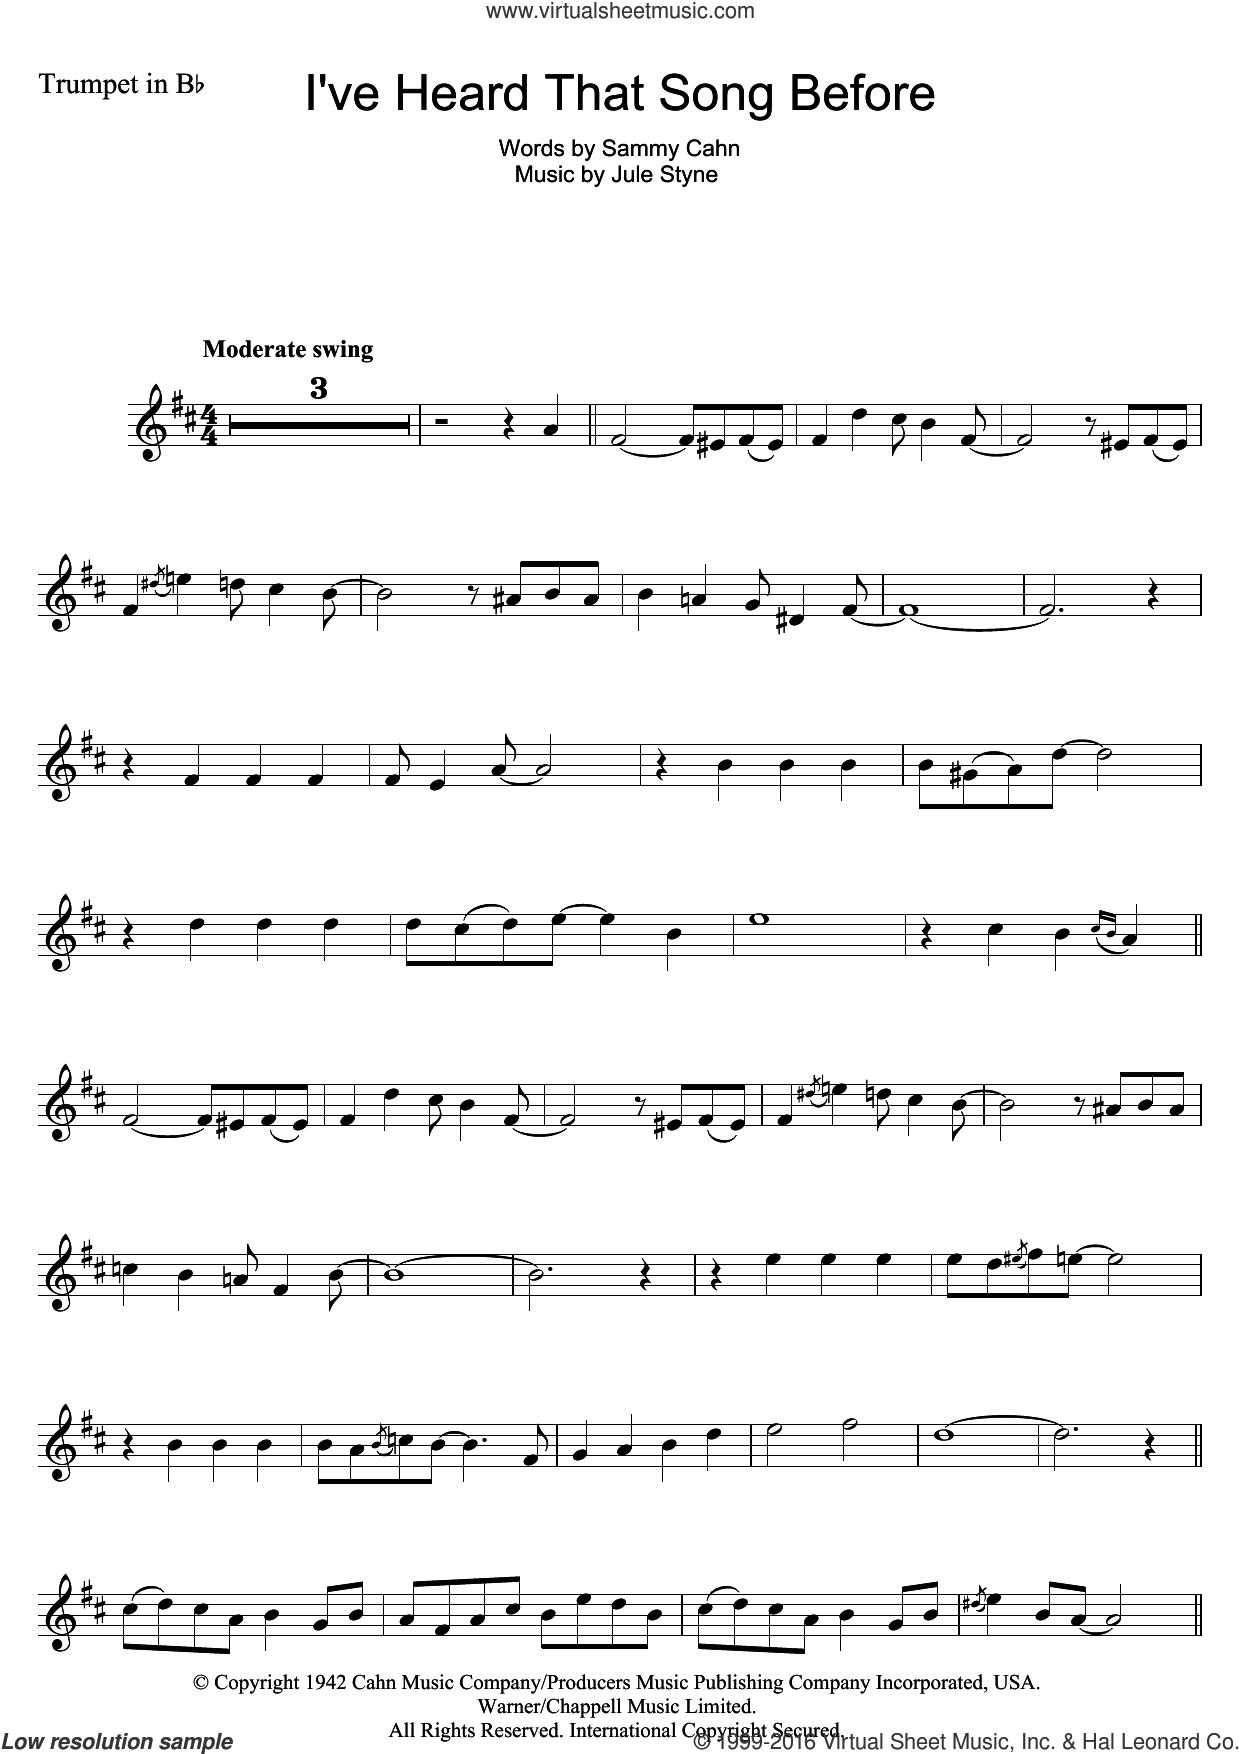 Easy Fly Me To The Moon Trumpet Sheet Music រូបភាពប្លុក Images